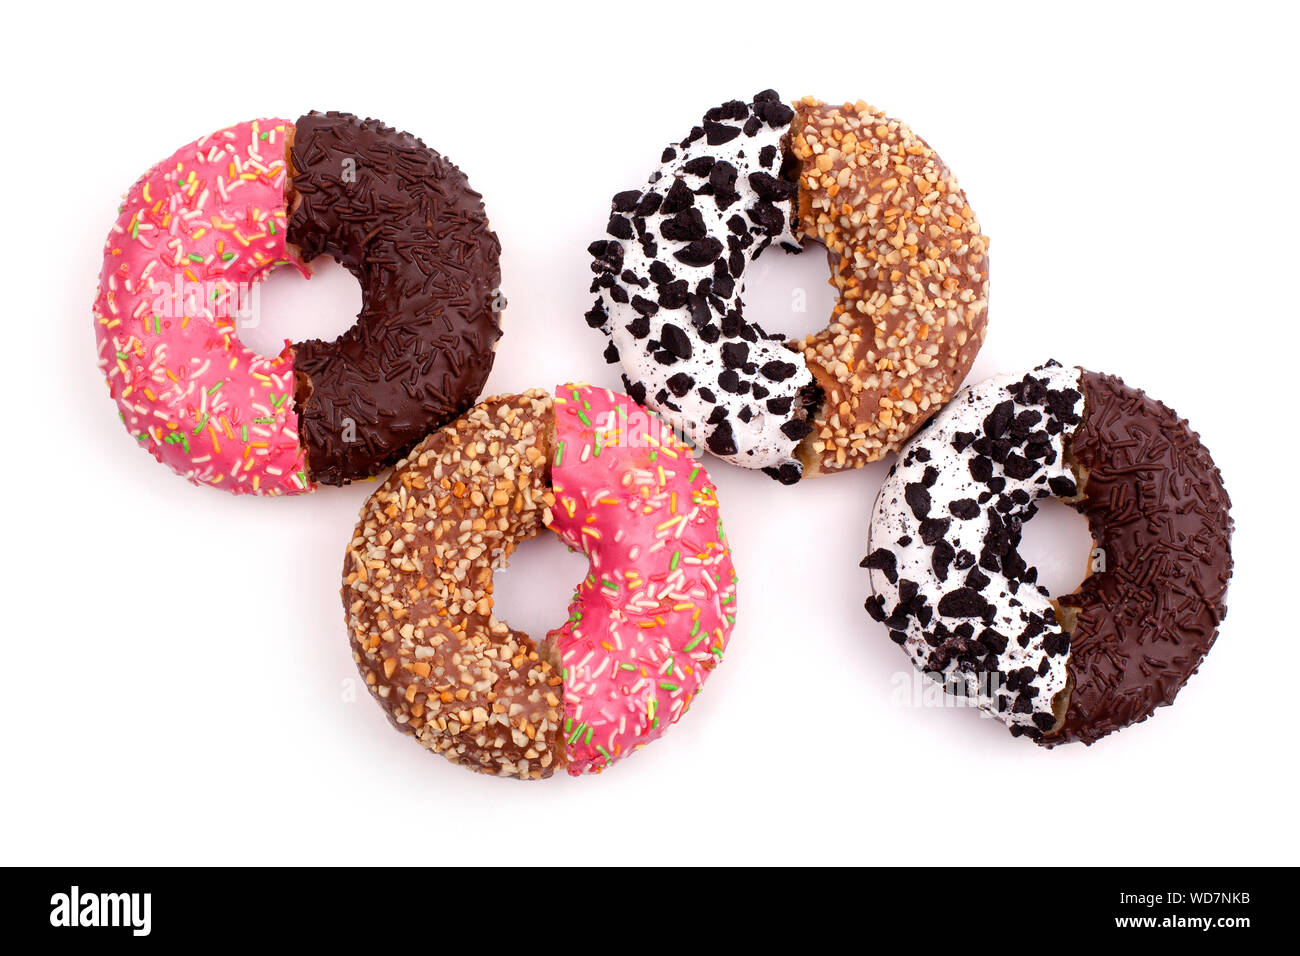 Different donuts halves mixed on a white background top view close up Stock Photo